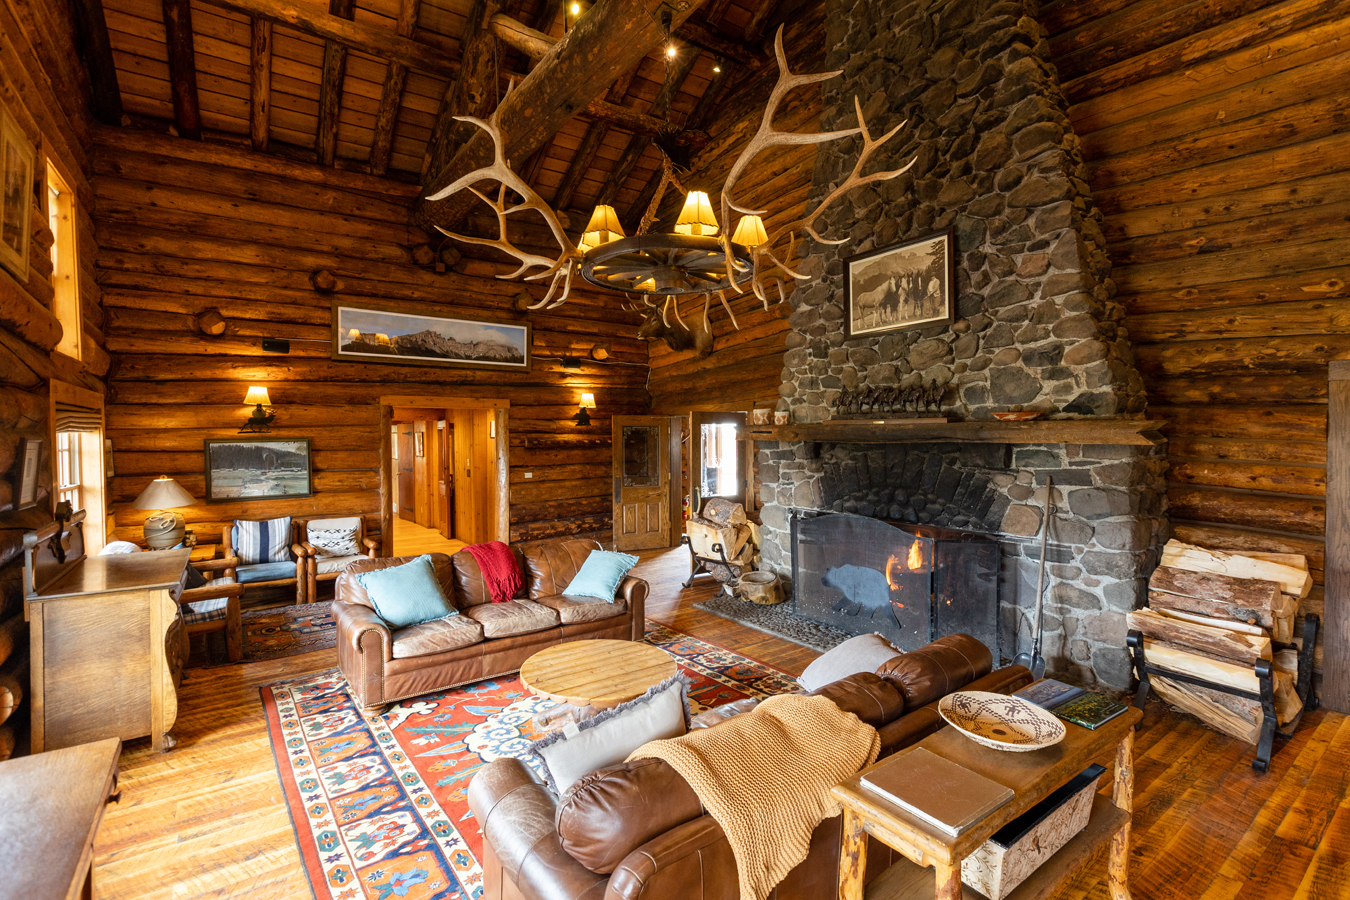 Gathering around crackling fires in the historic lodge’s giant stone fireplaces, guests enjoy cozy relaxation after a day’s snowy outdoor adventure in the Shoshone National Forest setting.